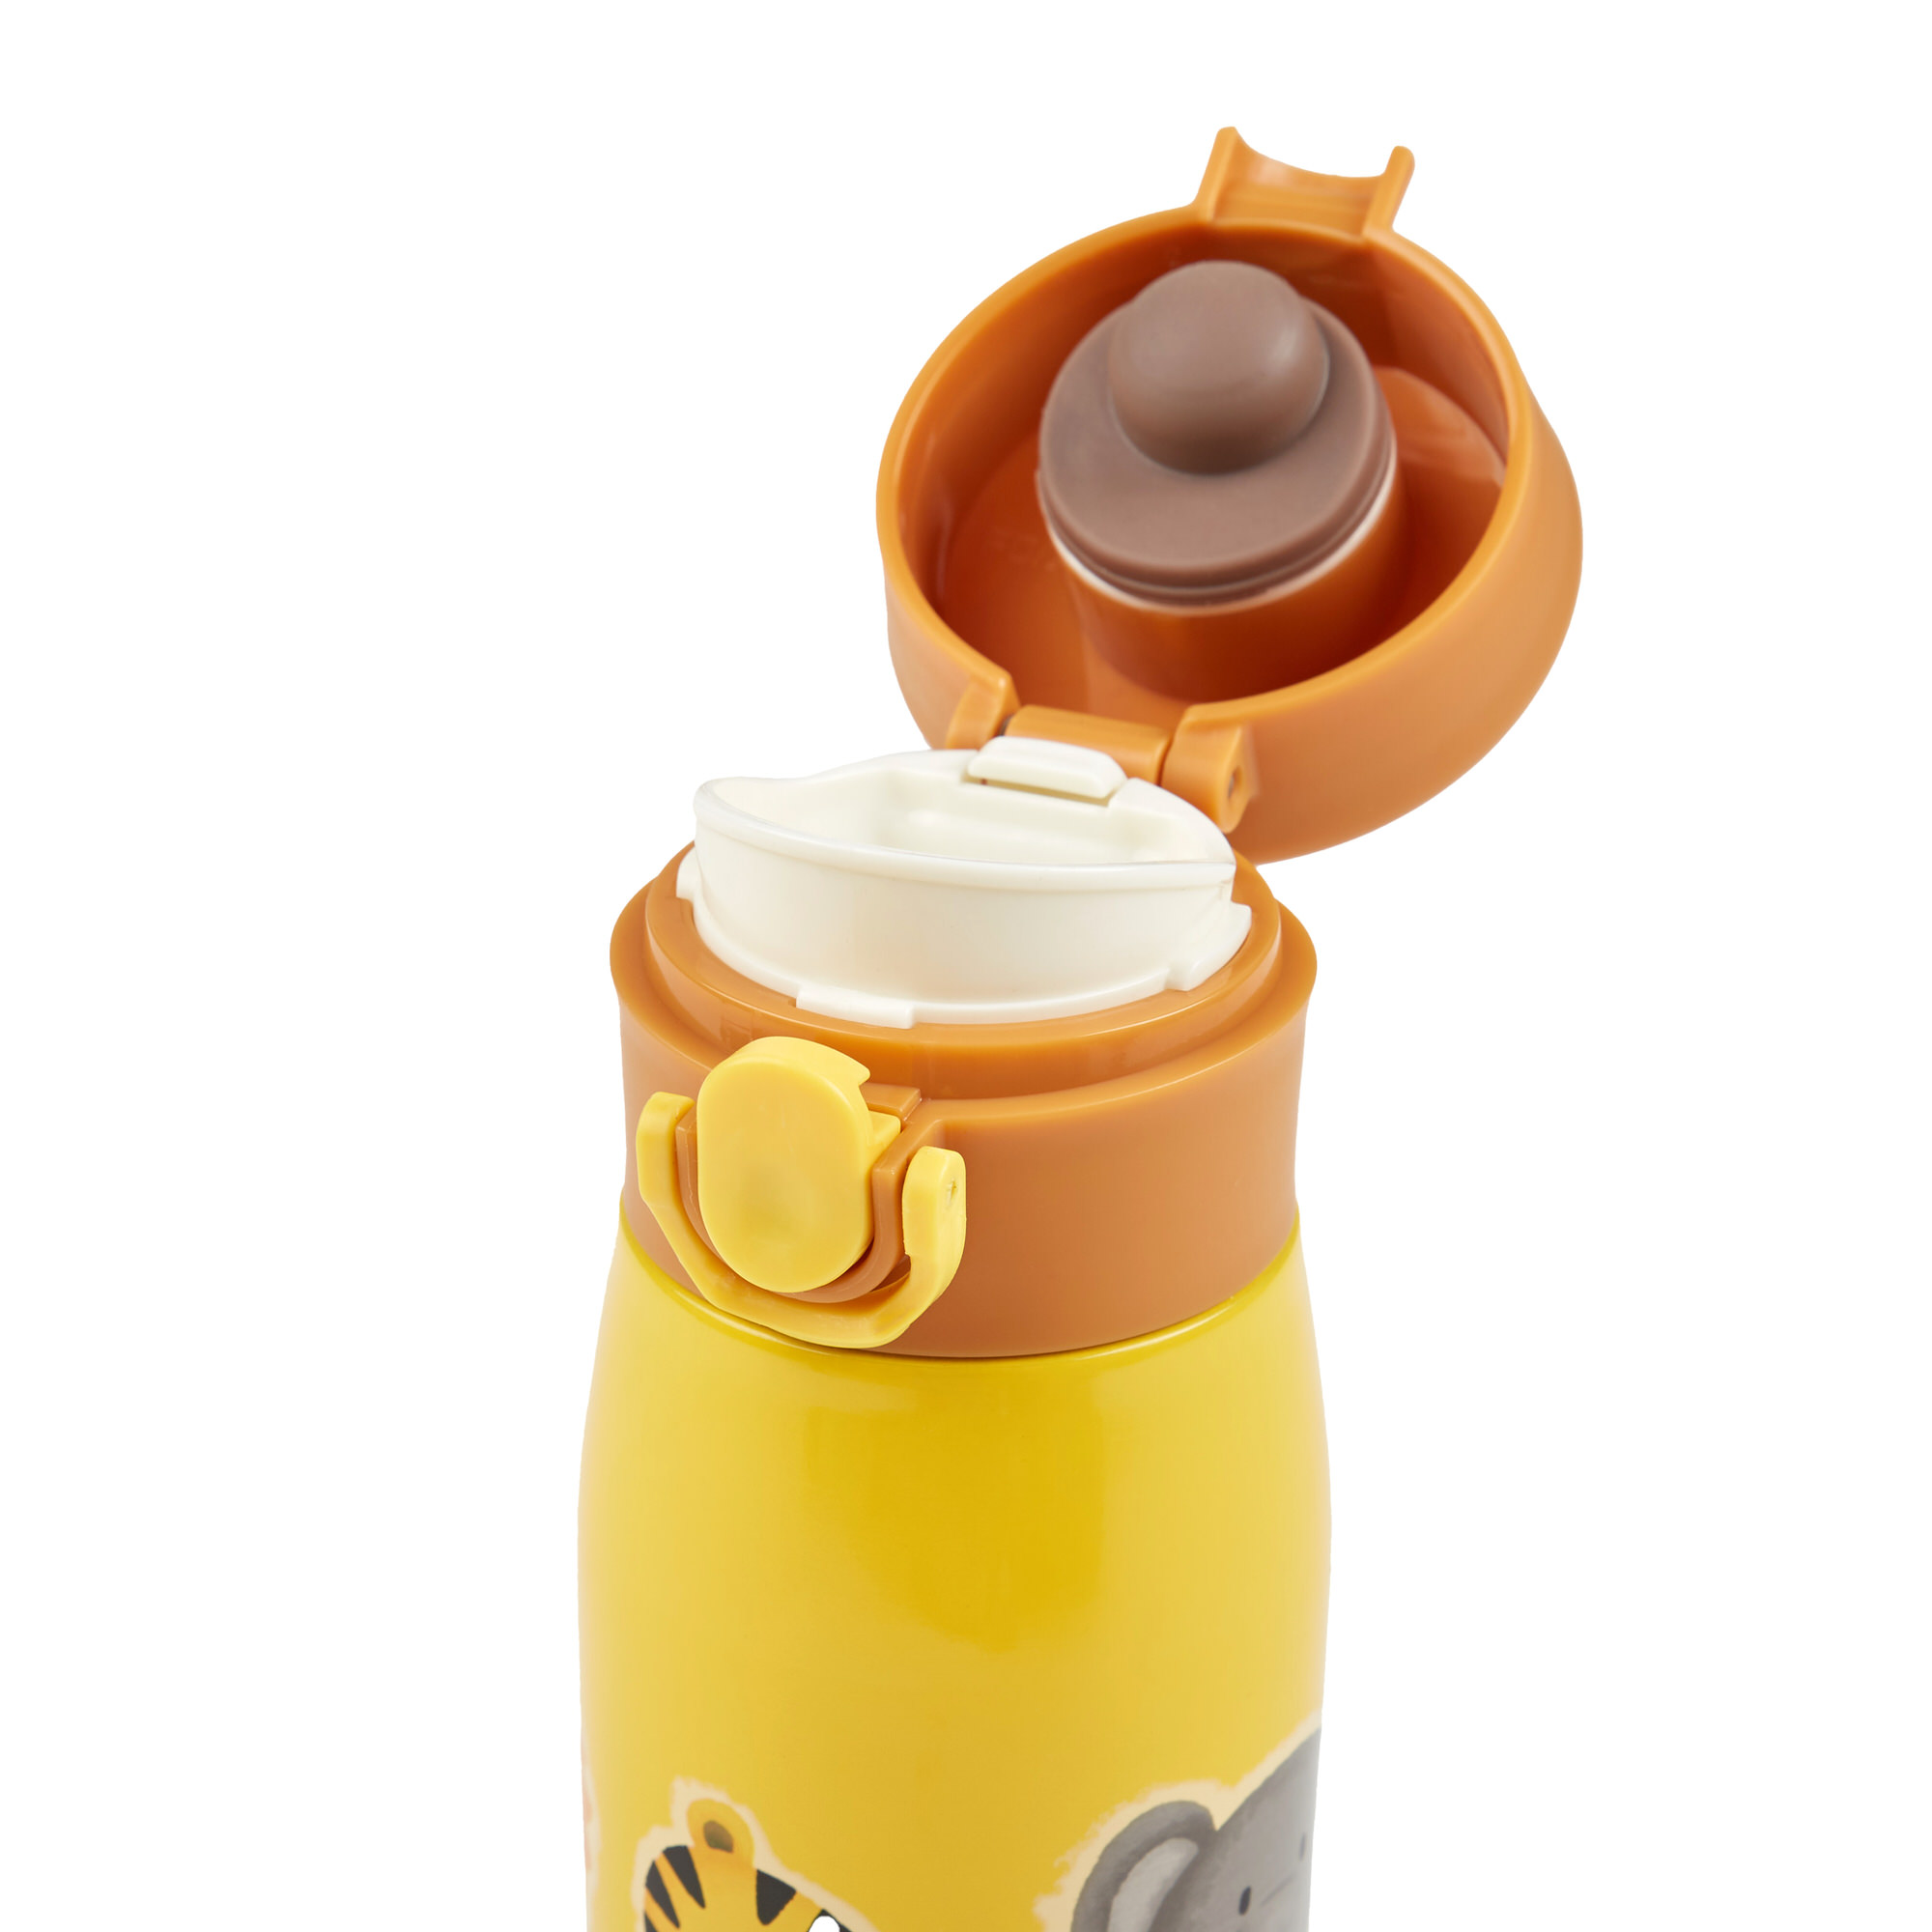 Insulated stainless steel drink bottle zoo animals for children